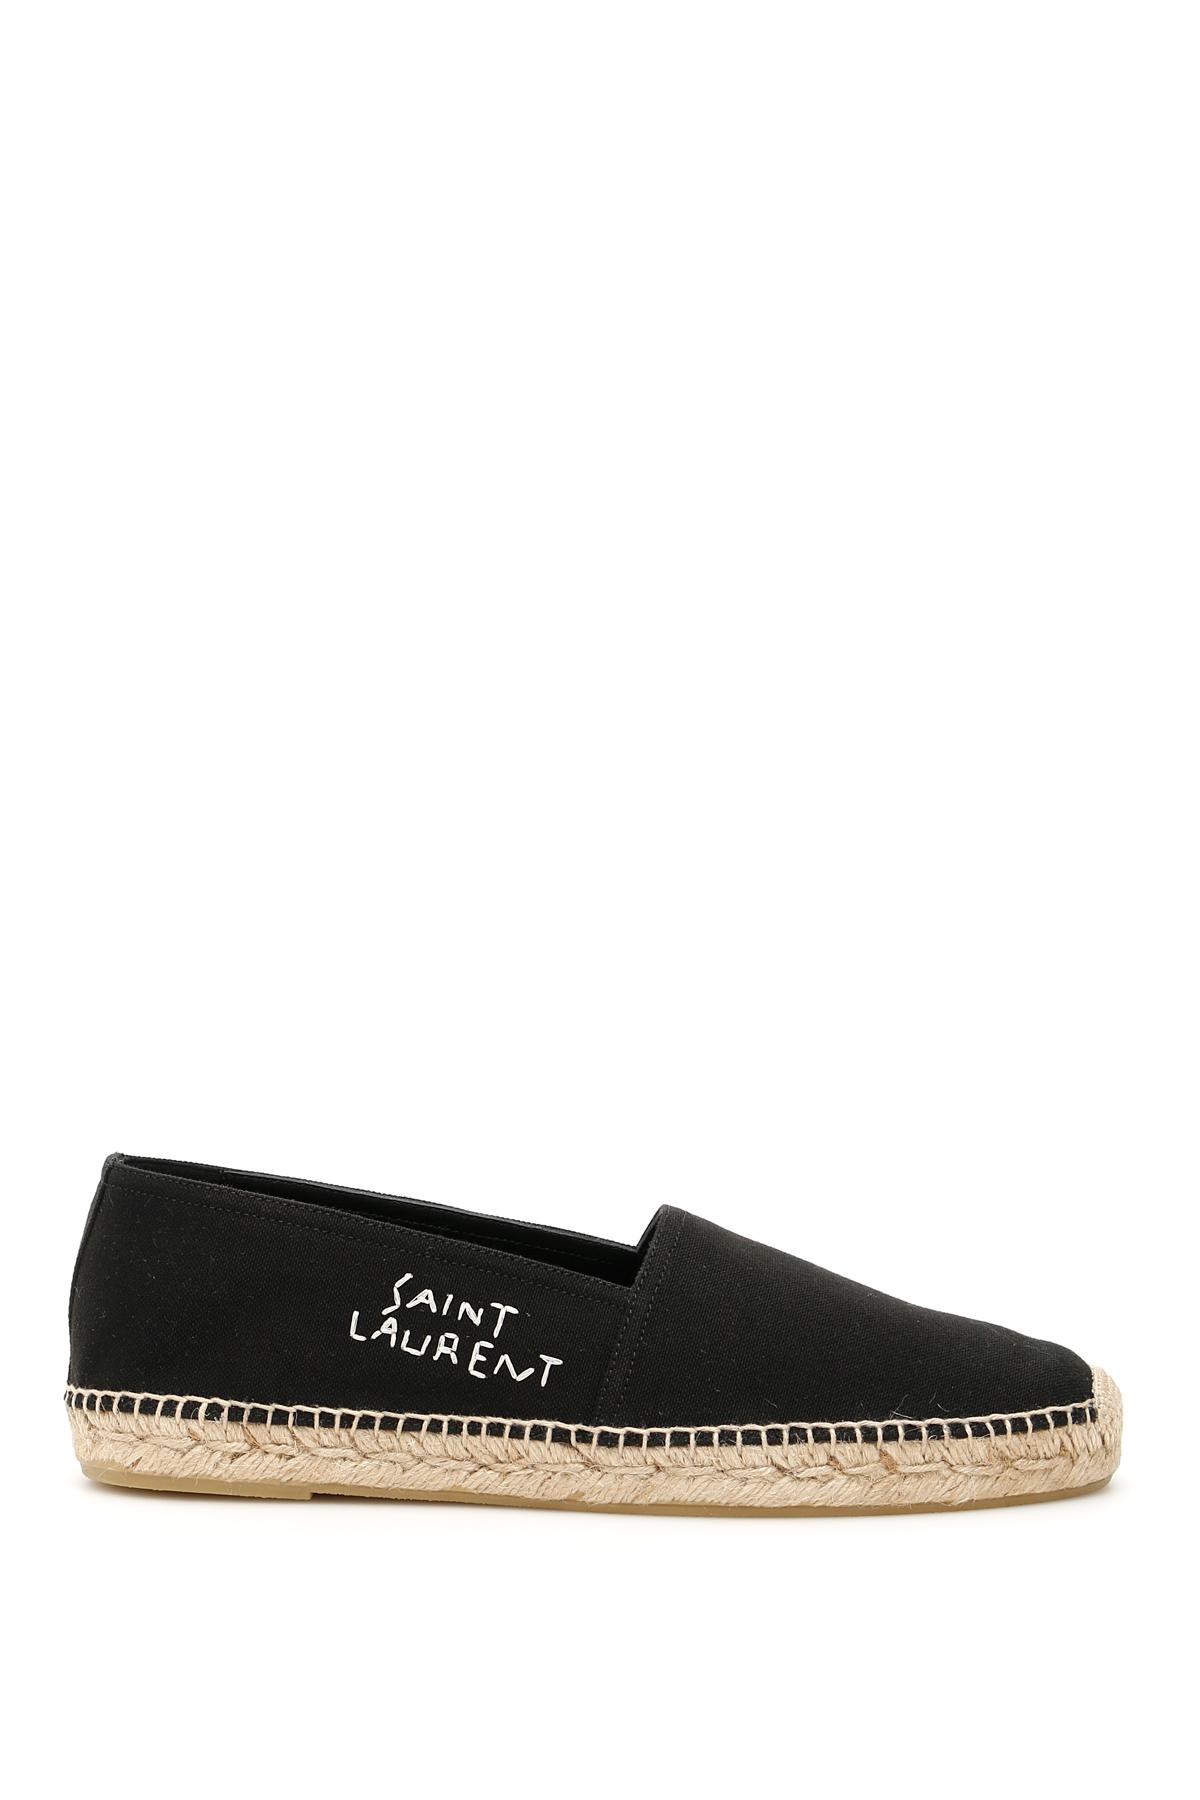 Saint Laurent Leather Canvas Espadrilles With Embroidered Logo in Black